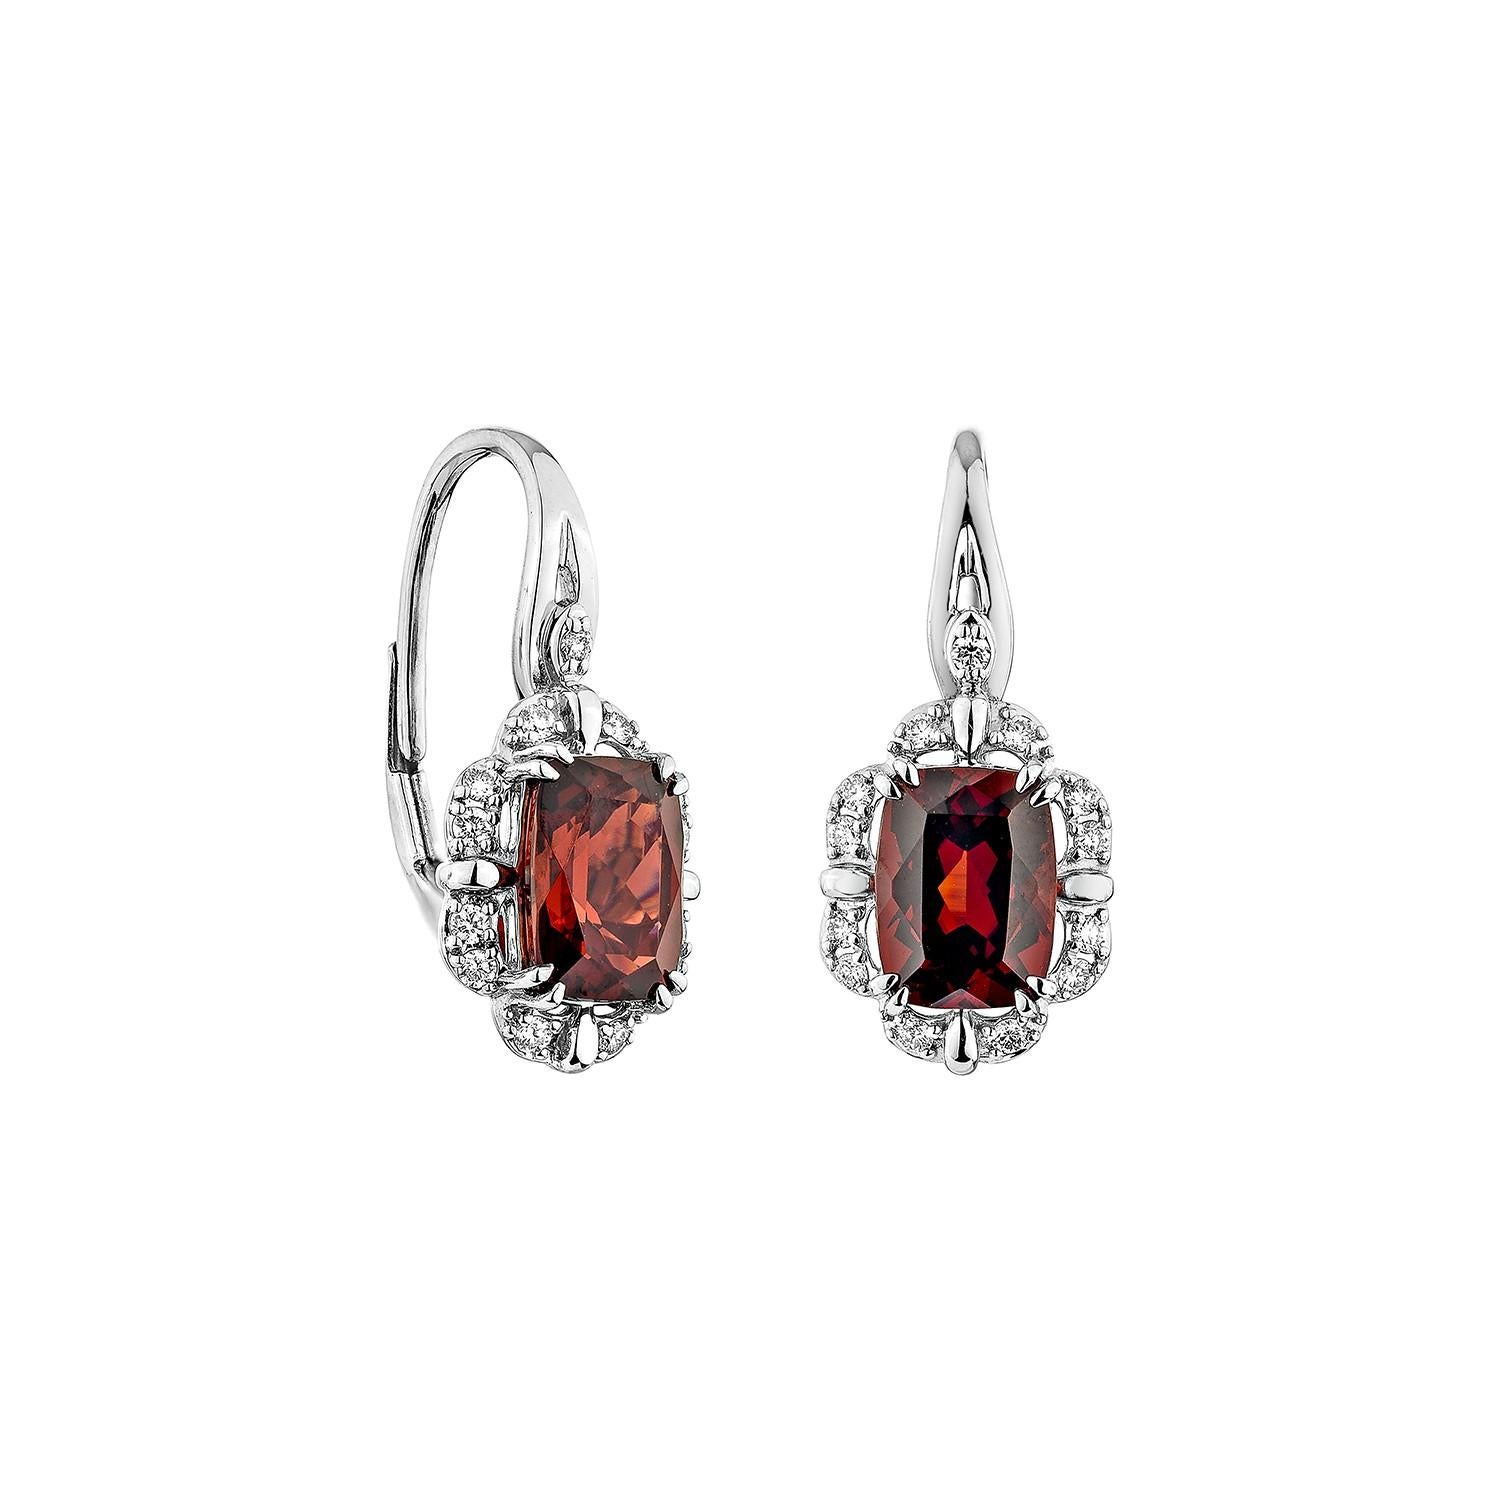 Presented A lovely Drop Earrings of Garnet is perfect for people who want to wear it to any occasion or celebration. Its captivating garnet, and white diamond set in 14karat white gold, intended to charm hearts and elevate any special occasion.
